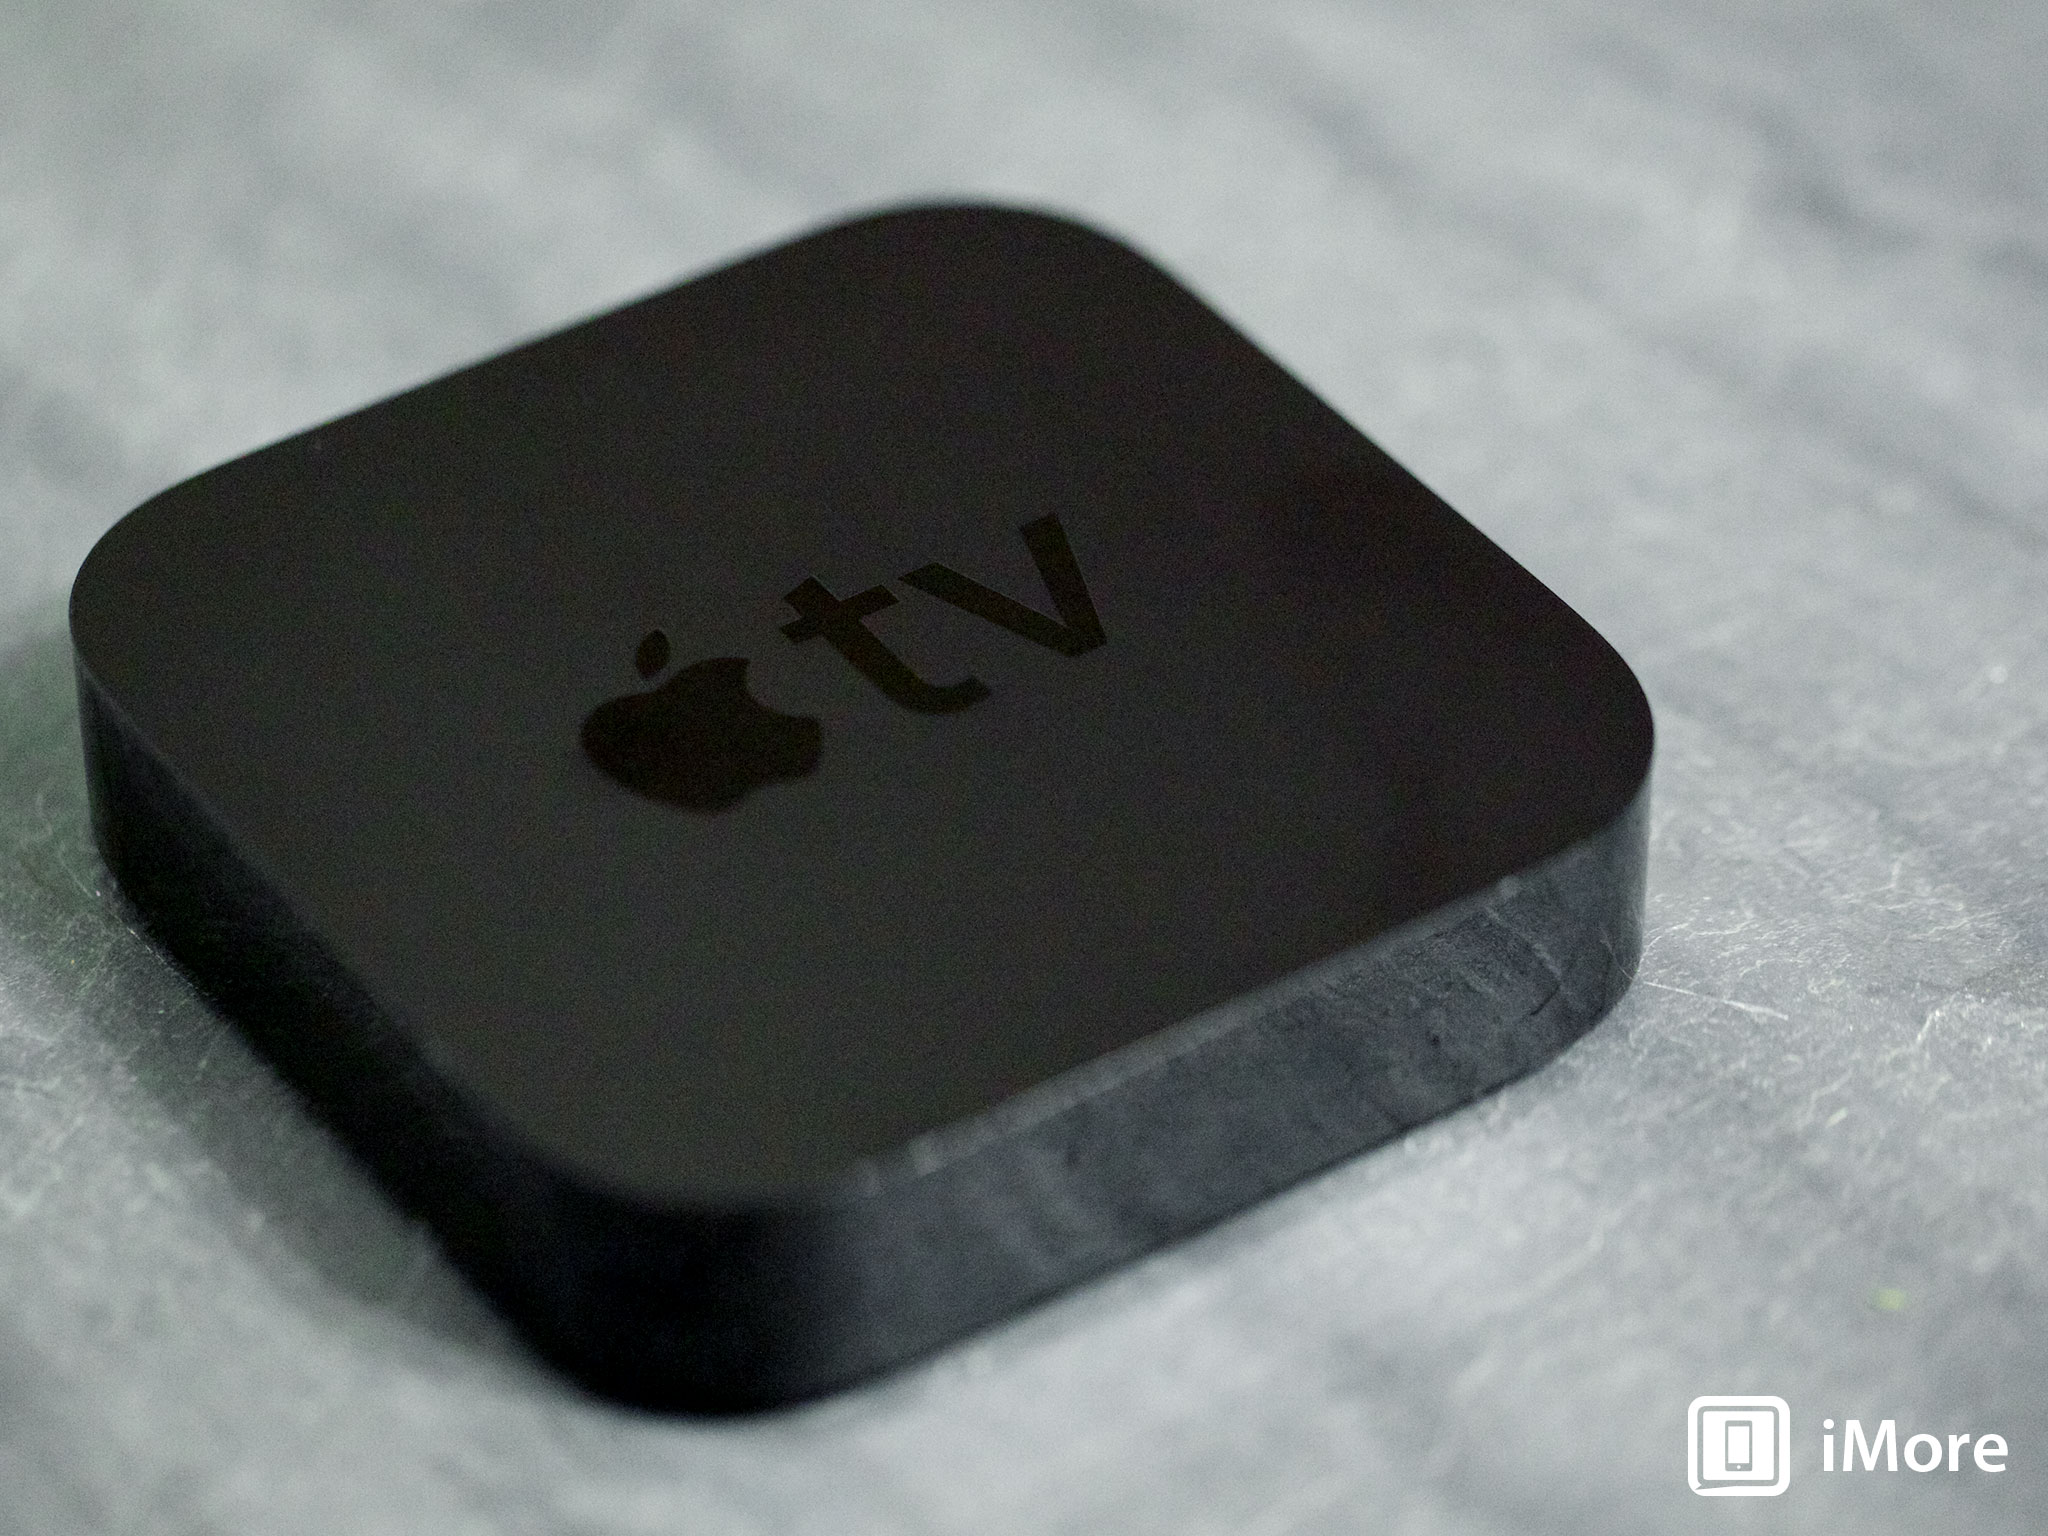 Apple TV Software 6.0 update now available - again!